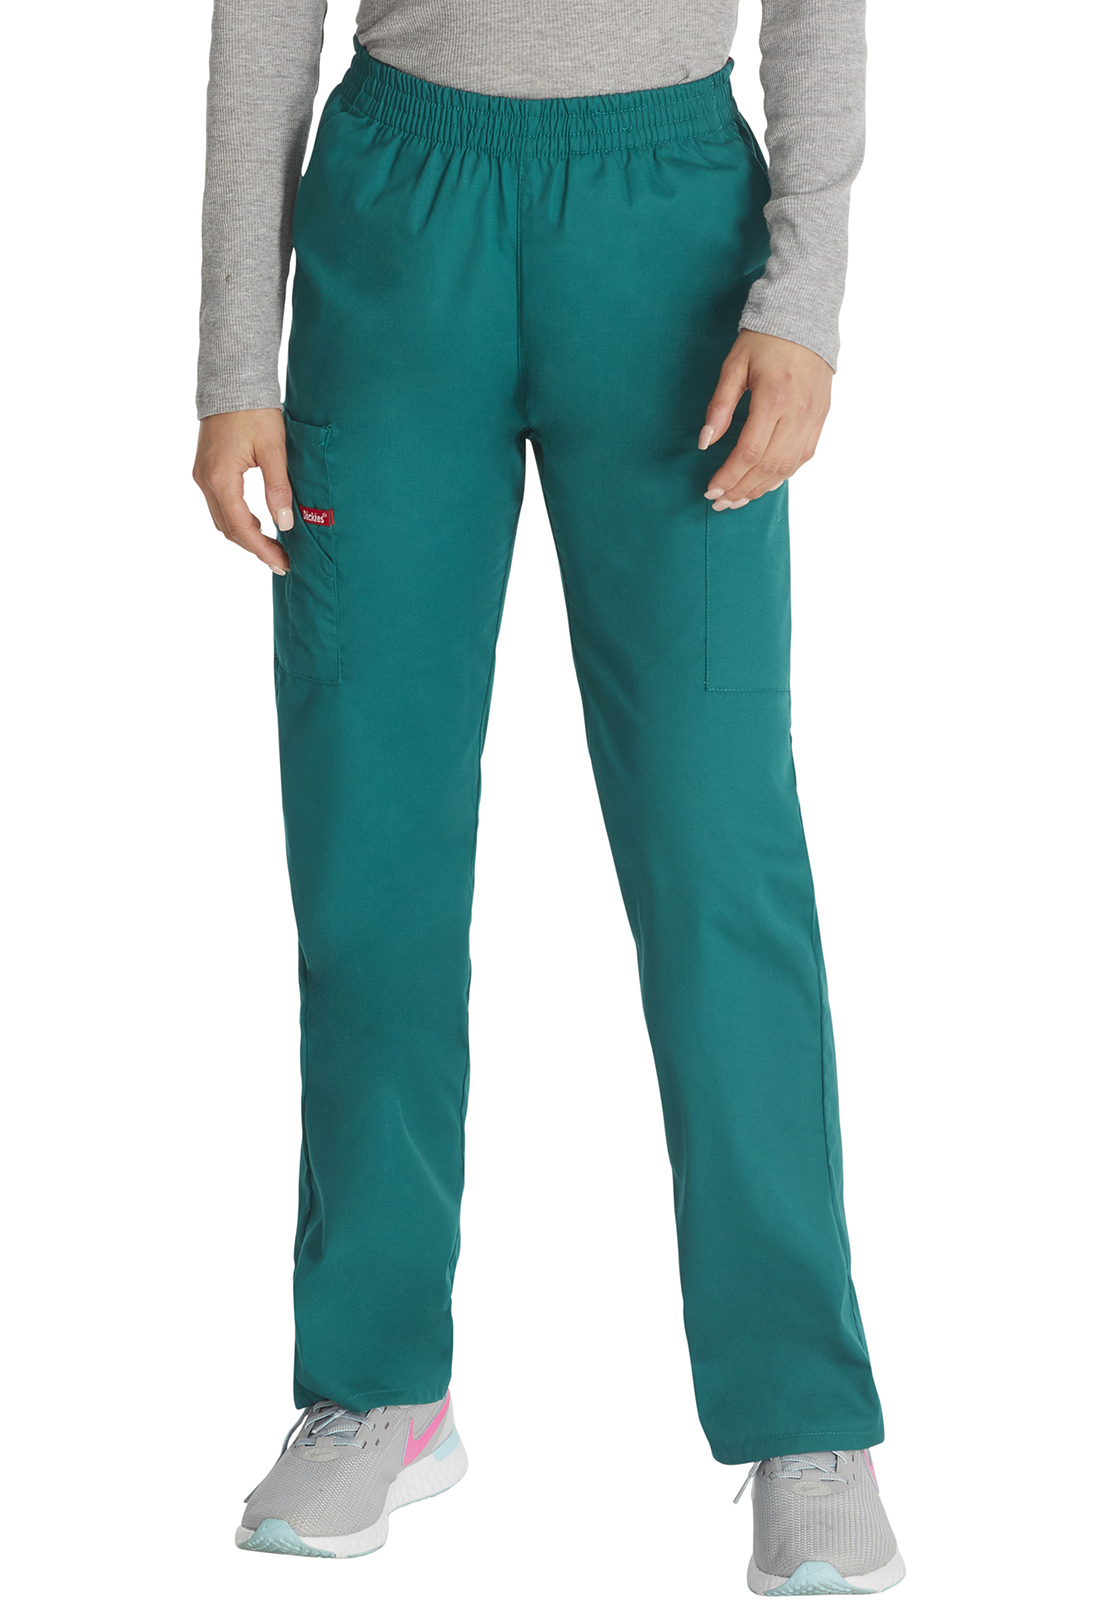 Dickies EDS Signature Scrubs Pant for Women Natural Rise Tapered Leg Pull-On Plus Size 86106, 4XL, Hunter - image 1 of 7